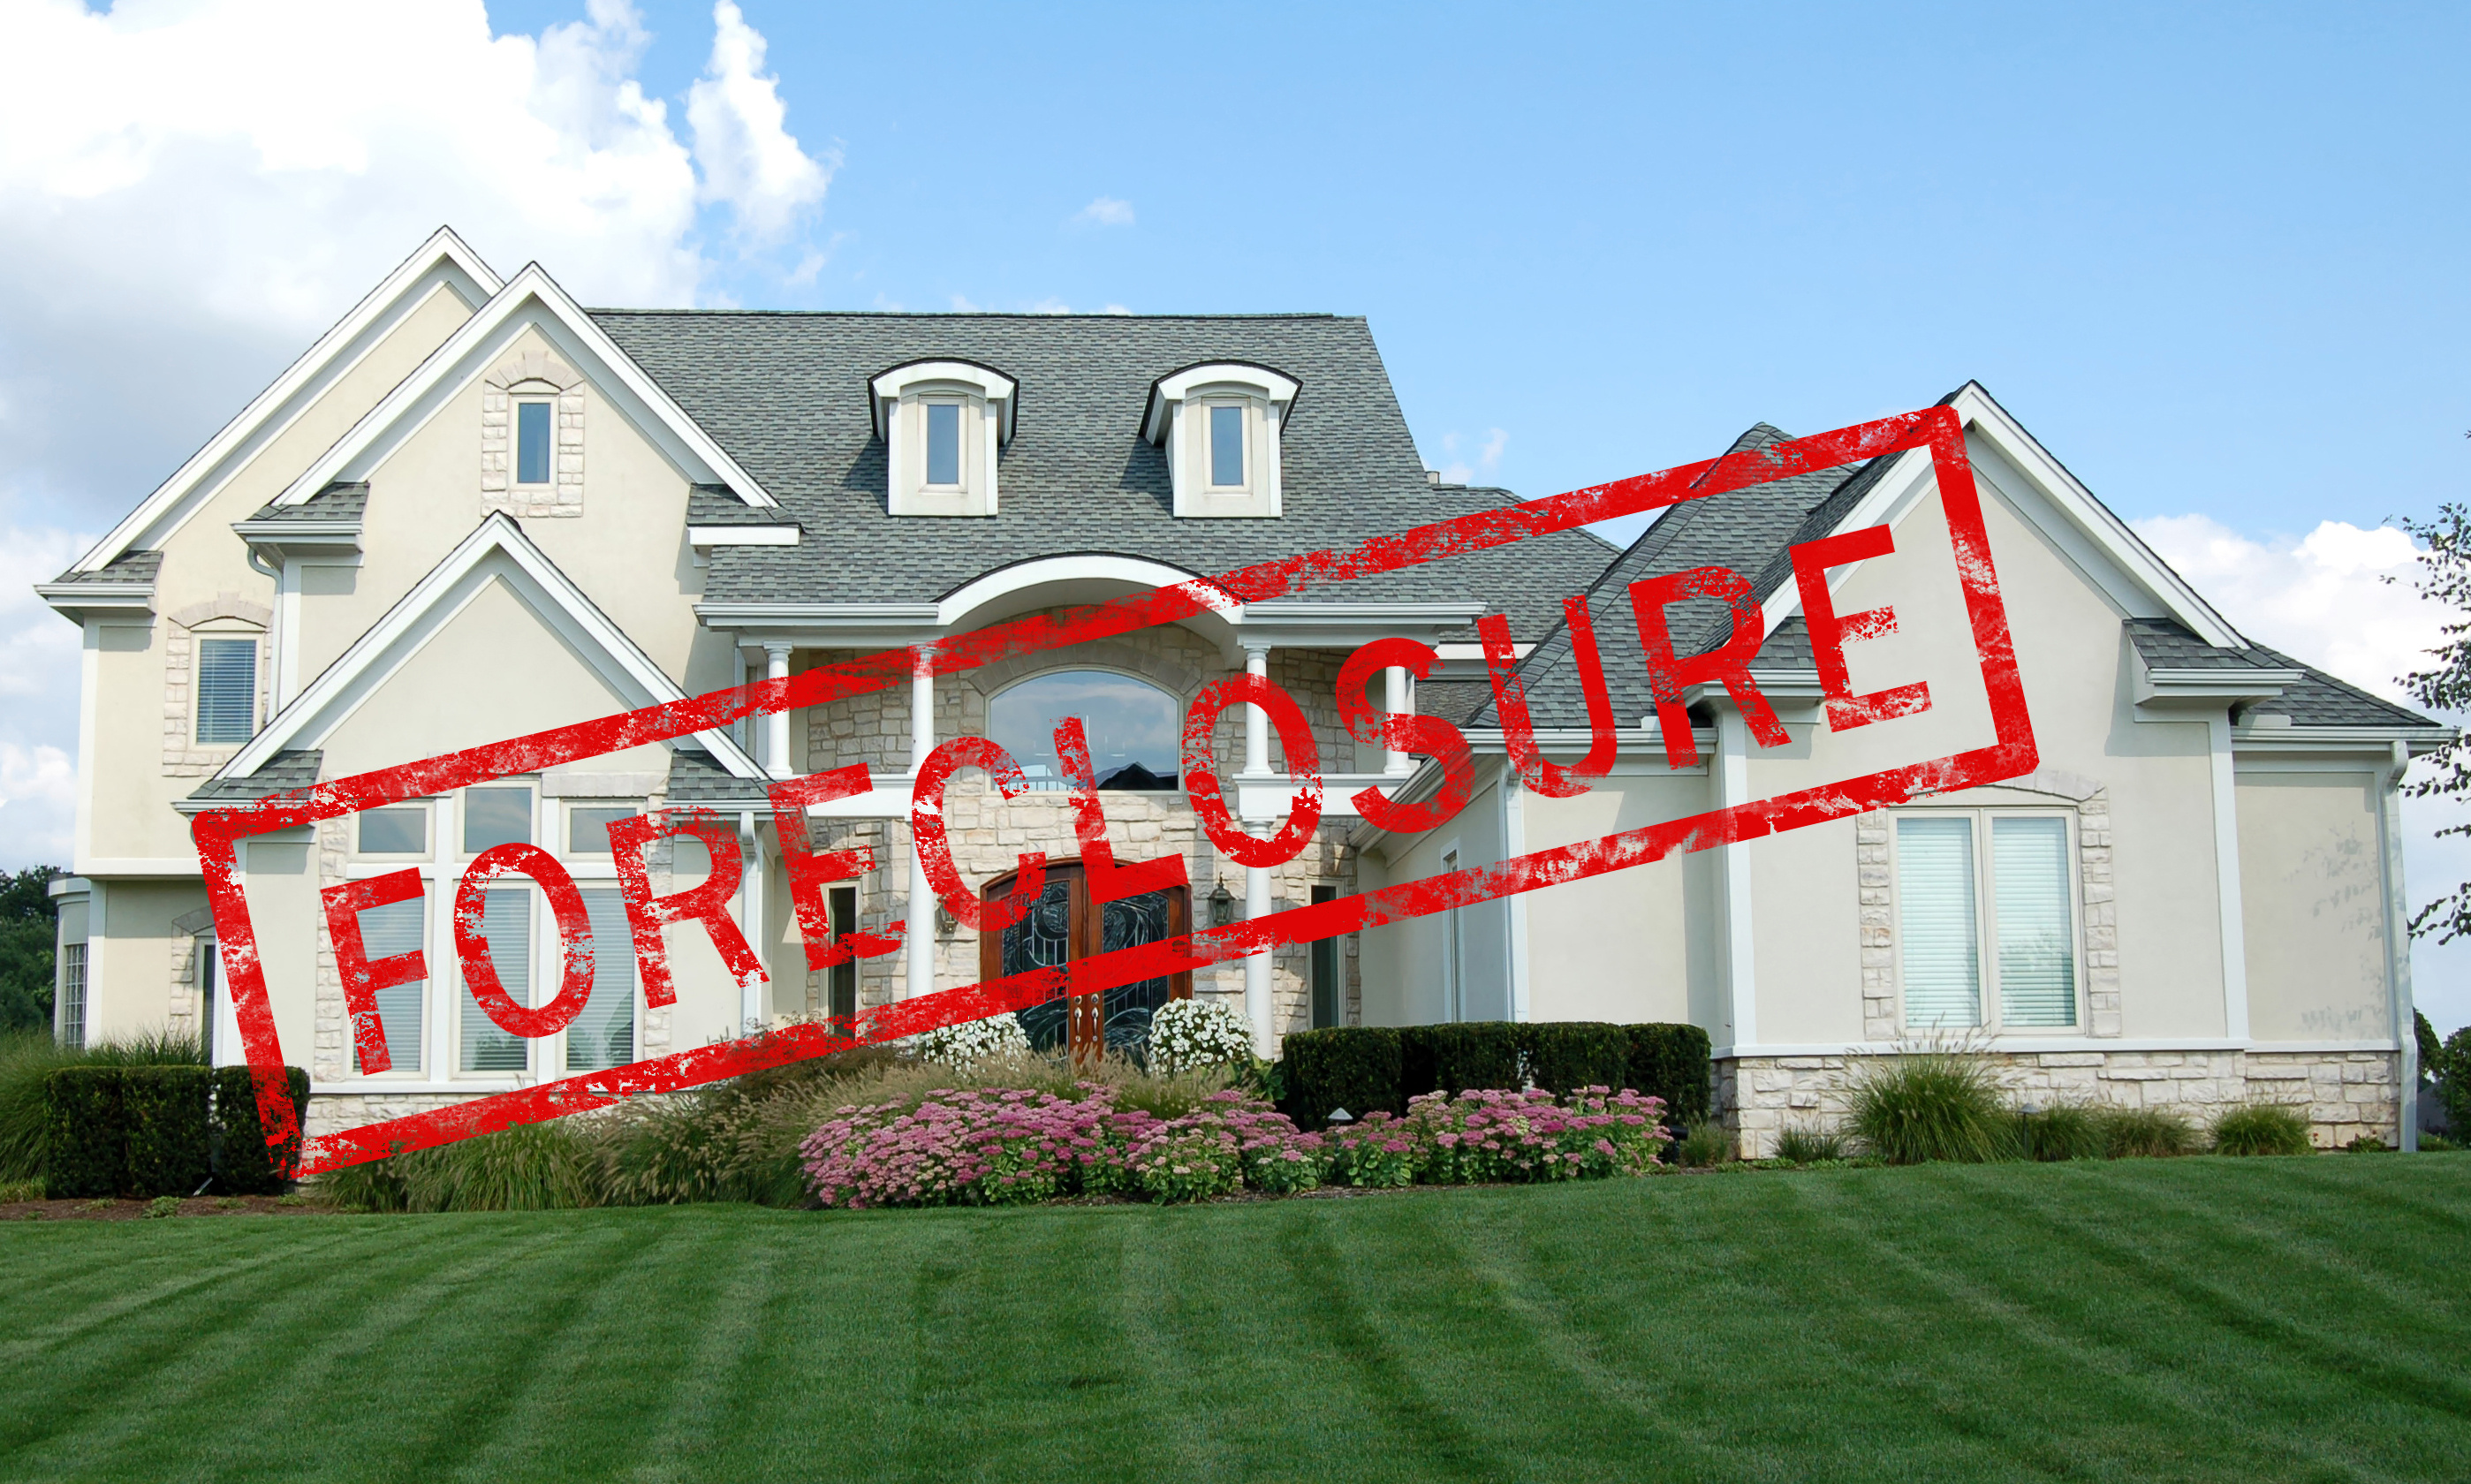 Call Peterson Appraisal Group to order appraisals regarding Placer foreclosures